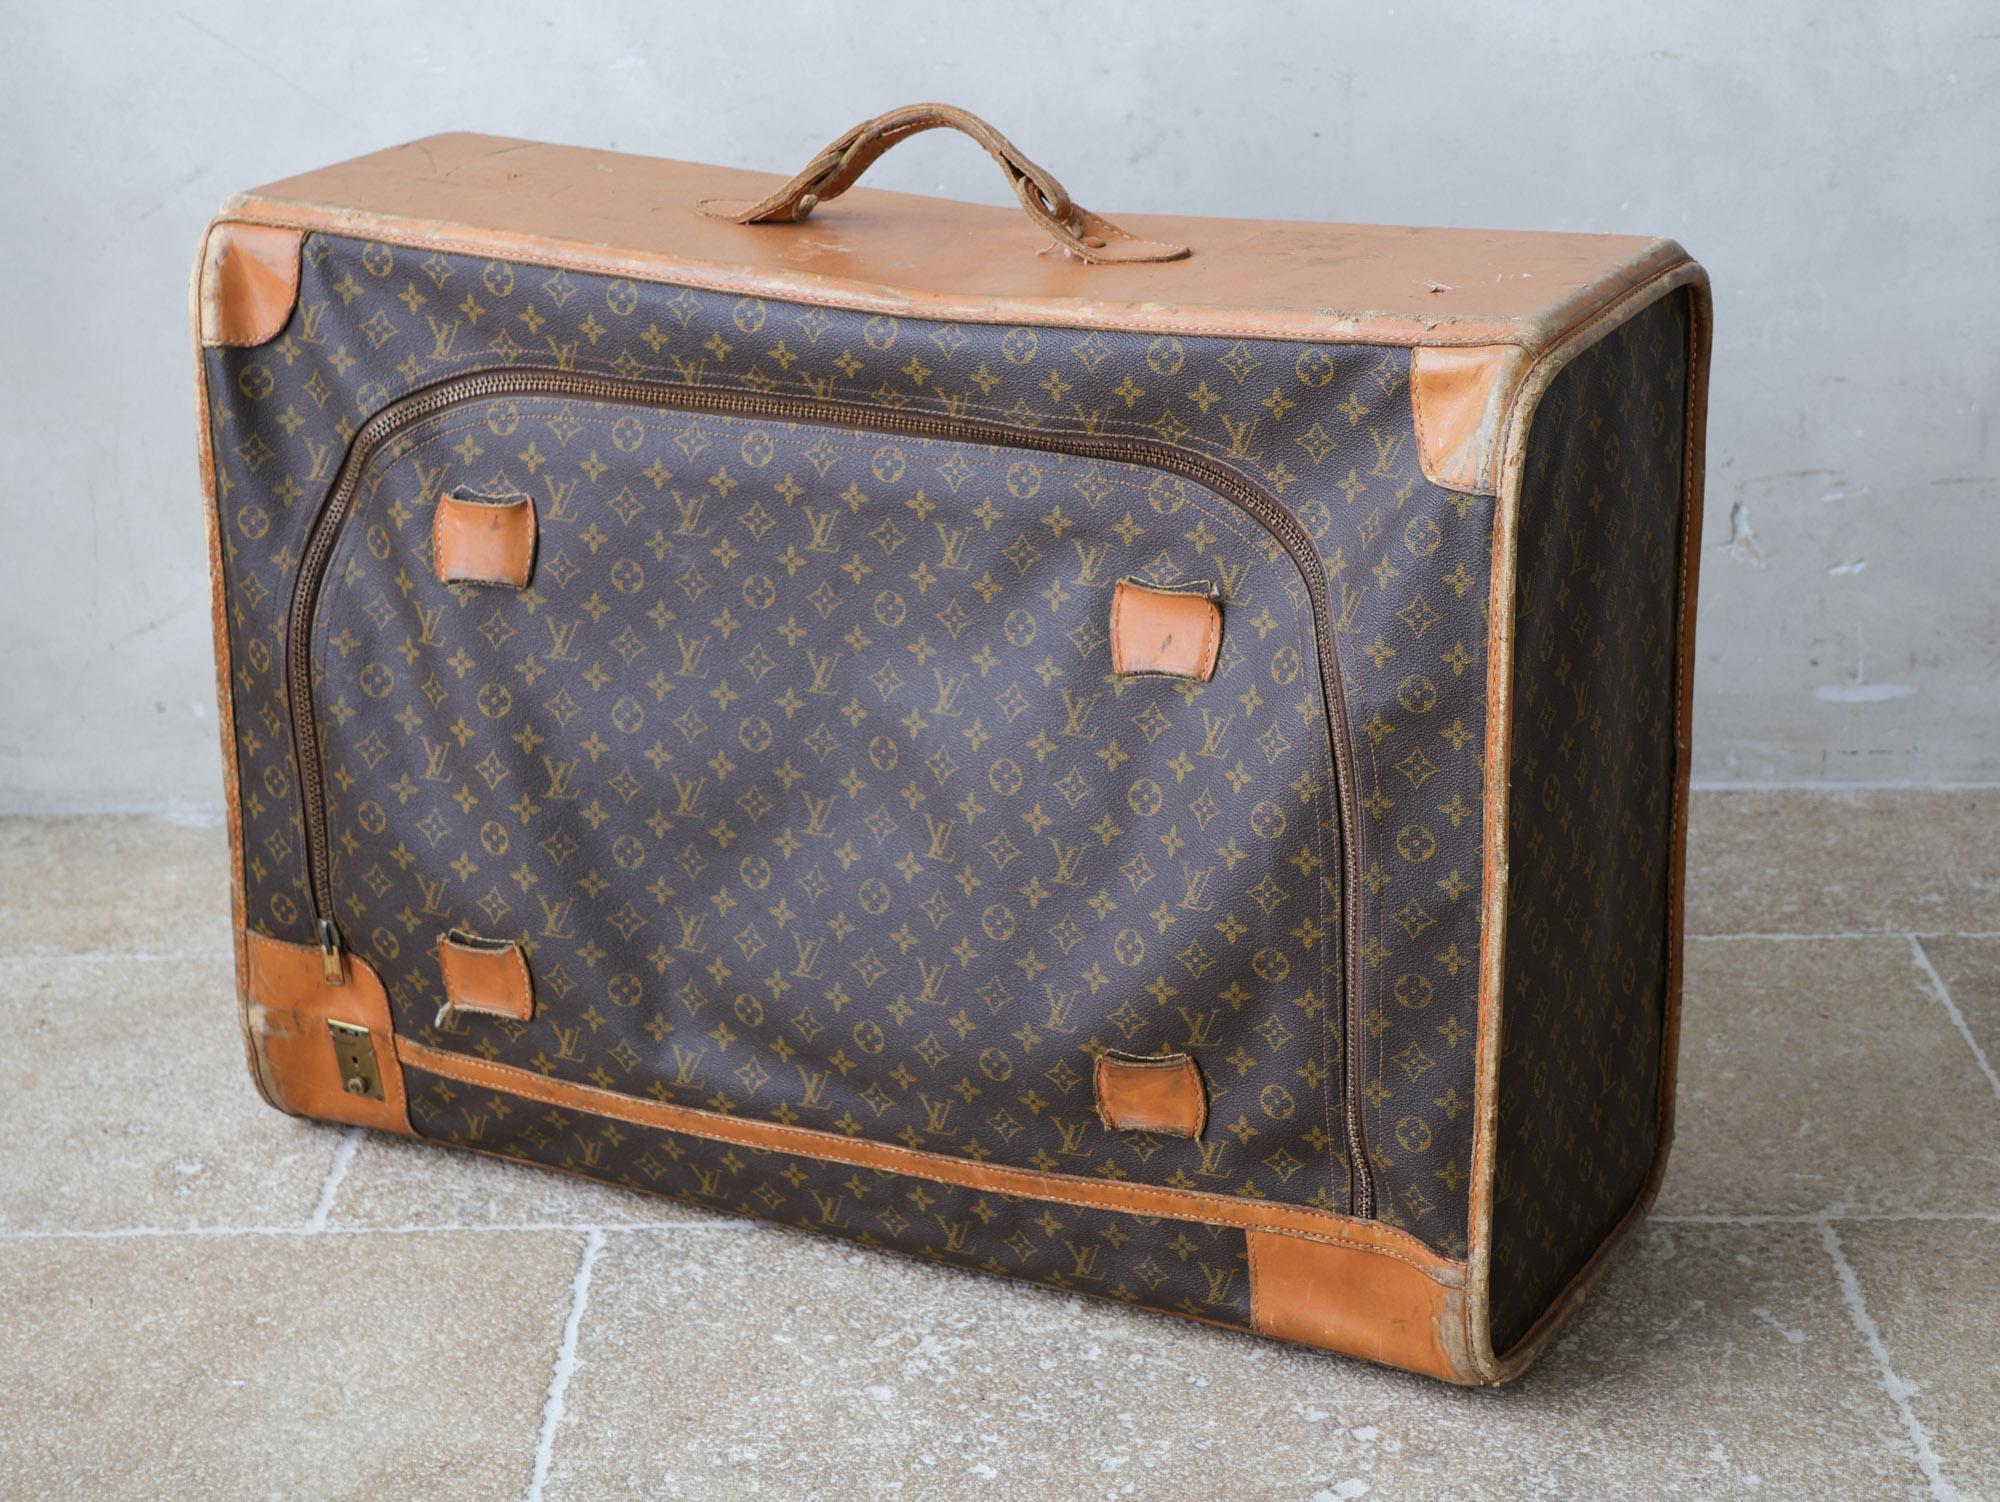 Original vintage Louis Vuitton suitcase, from the 1970s. It has the initials VP. This large soft travel bag is made of leather and canvas and has a zipper at the front. With its signature Louis Vuitton monogram print and Vachetta leather accents,